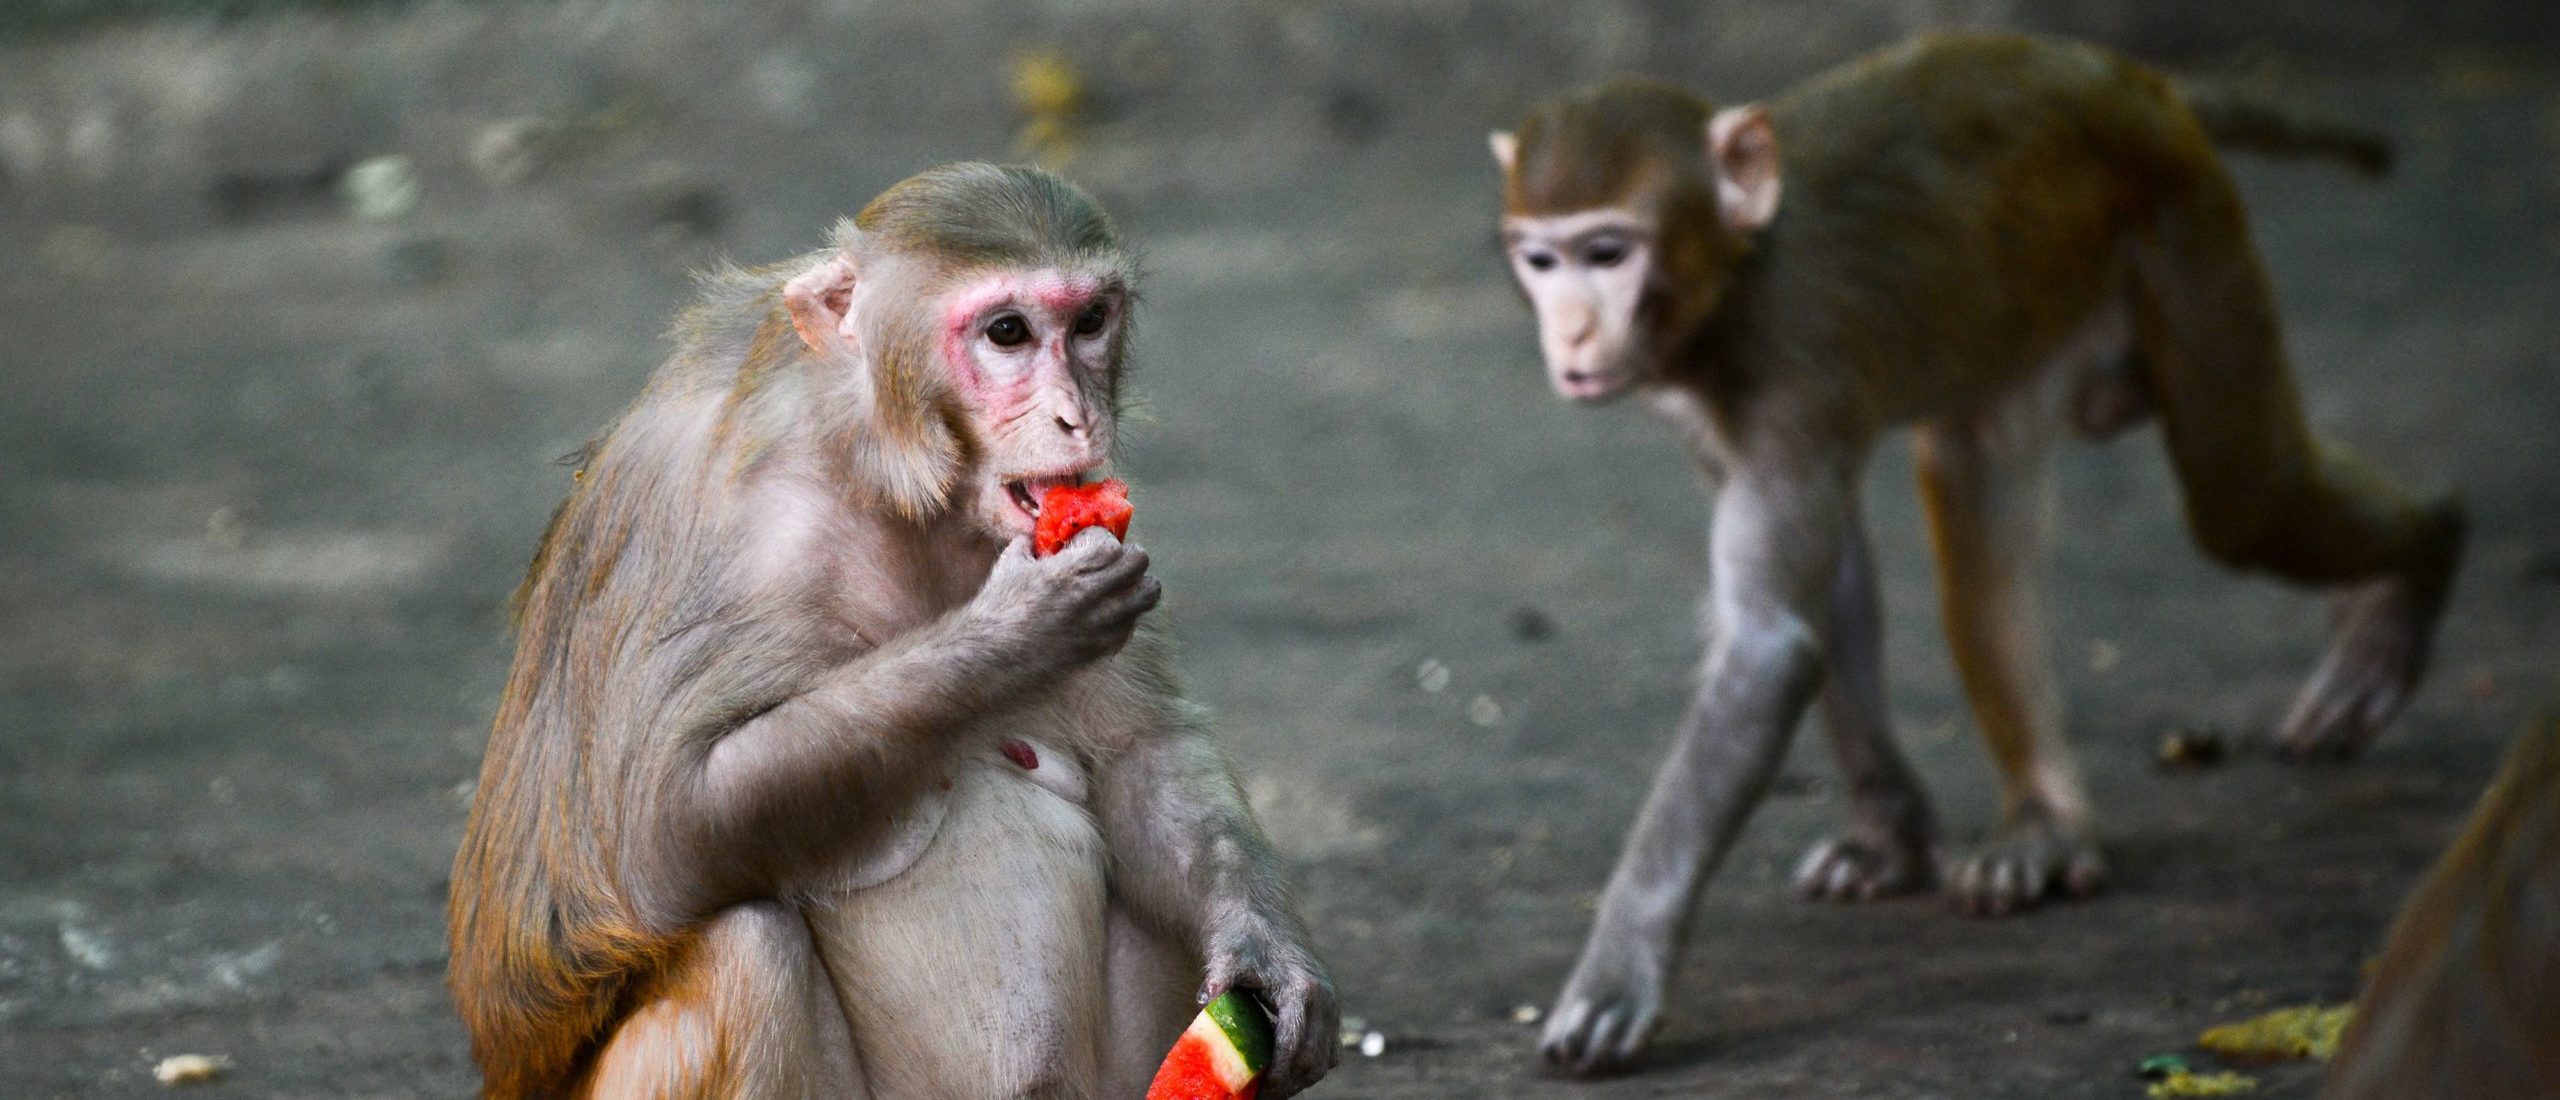 10-Year-Old Boy Fatally Attacked By Group Of Aggressive Monkeys In India